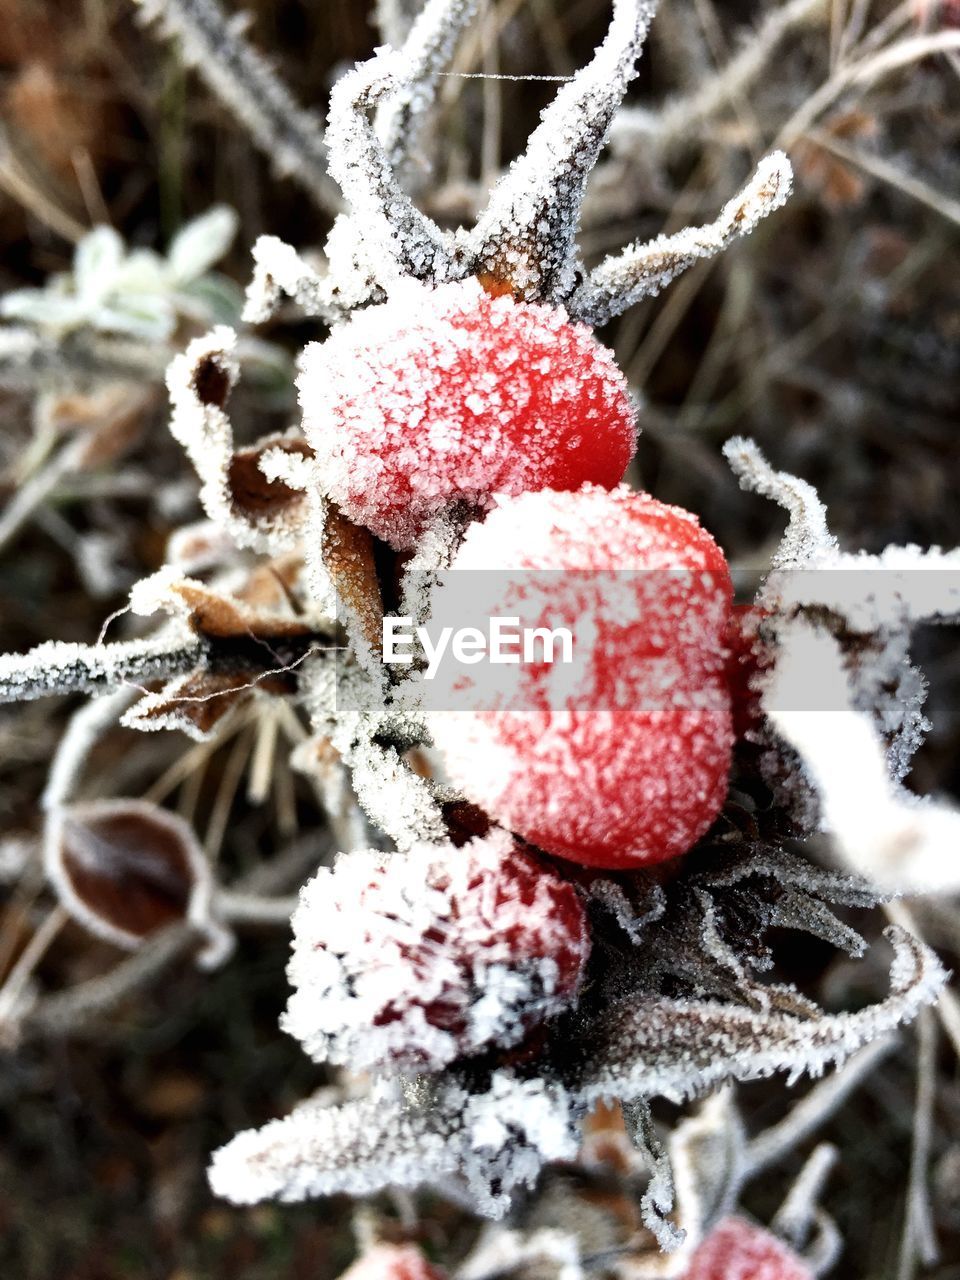 CLOSE-UP OF FROZEN BERRIES ON BRANCH